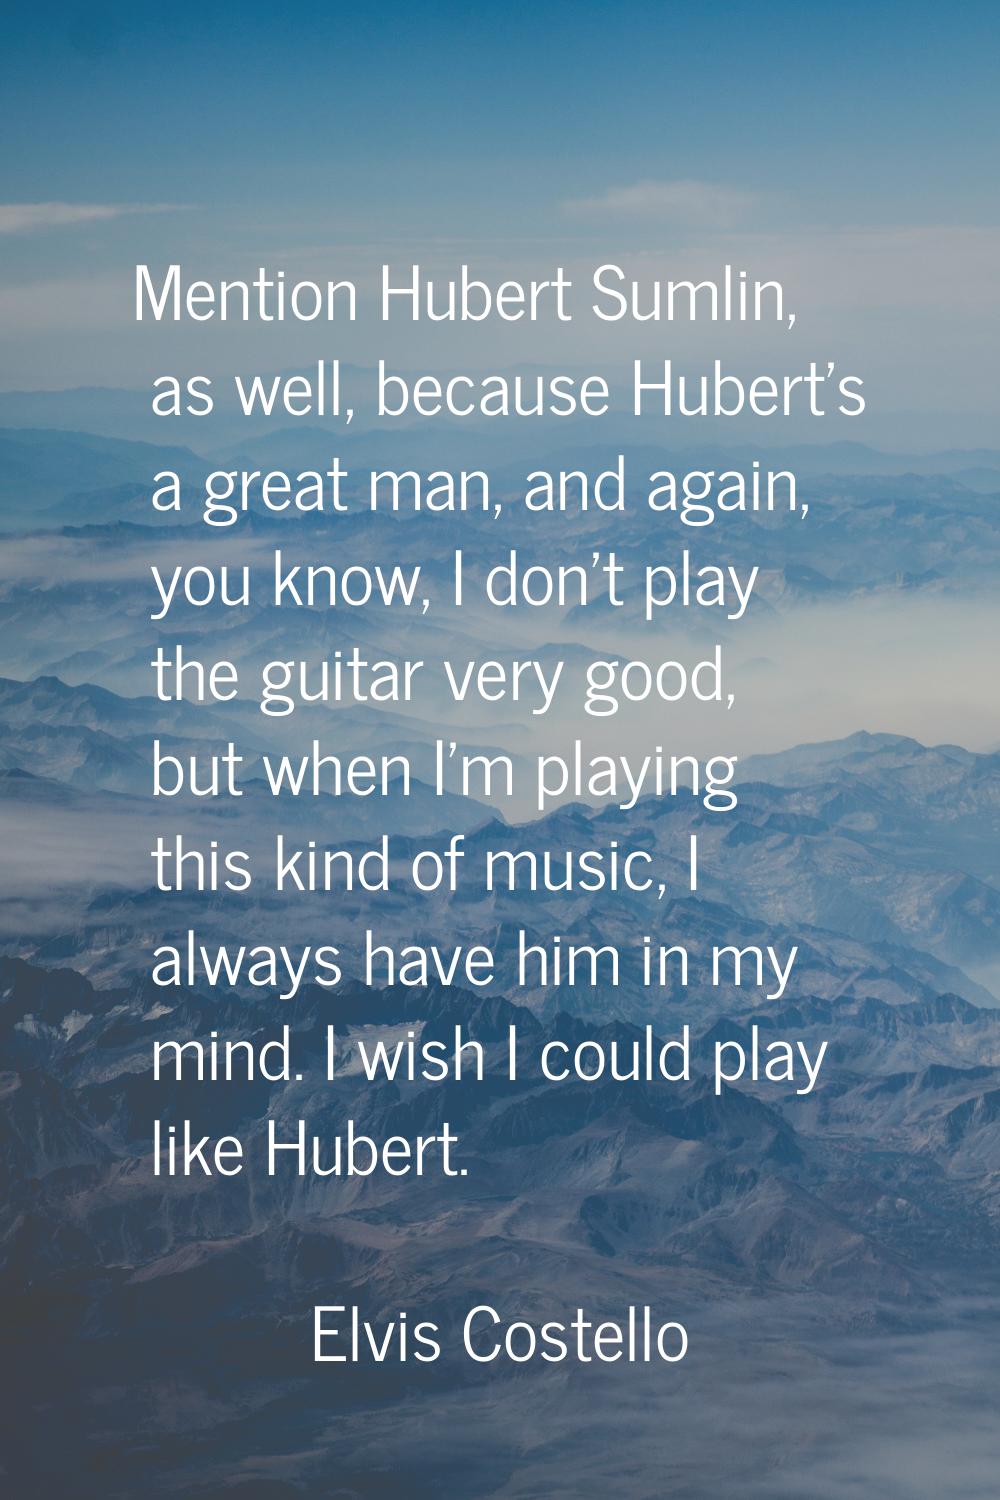 Mention Hubert Sumlin, as well, because Hubert's a great man, and again, you know, I don't play the